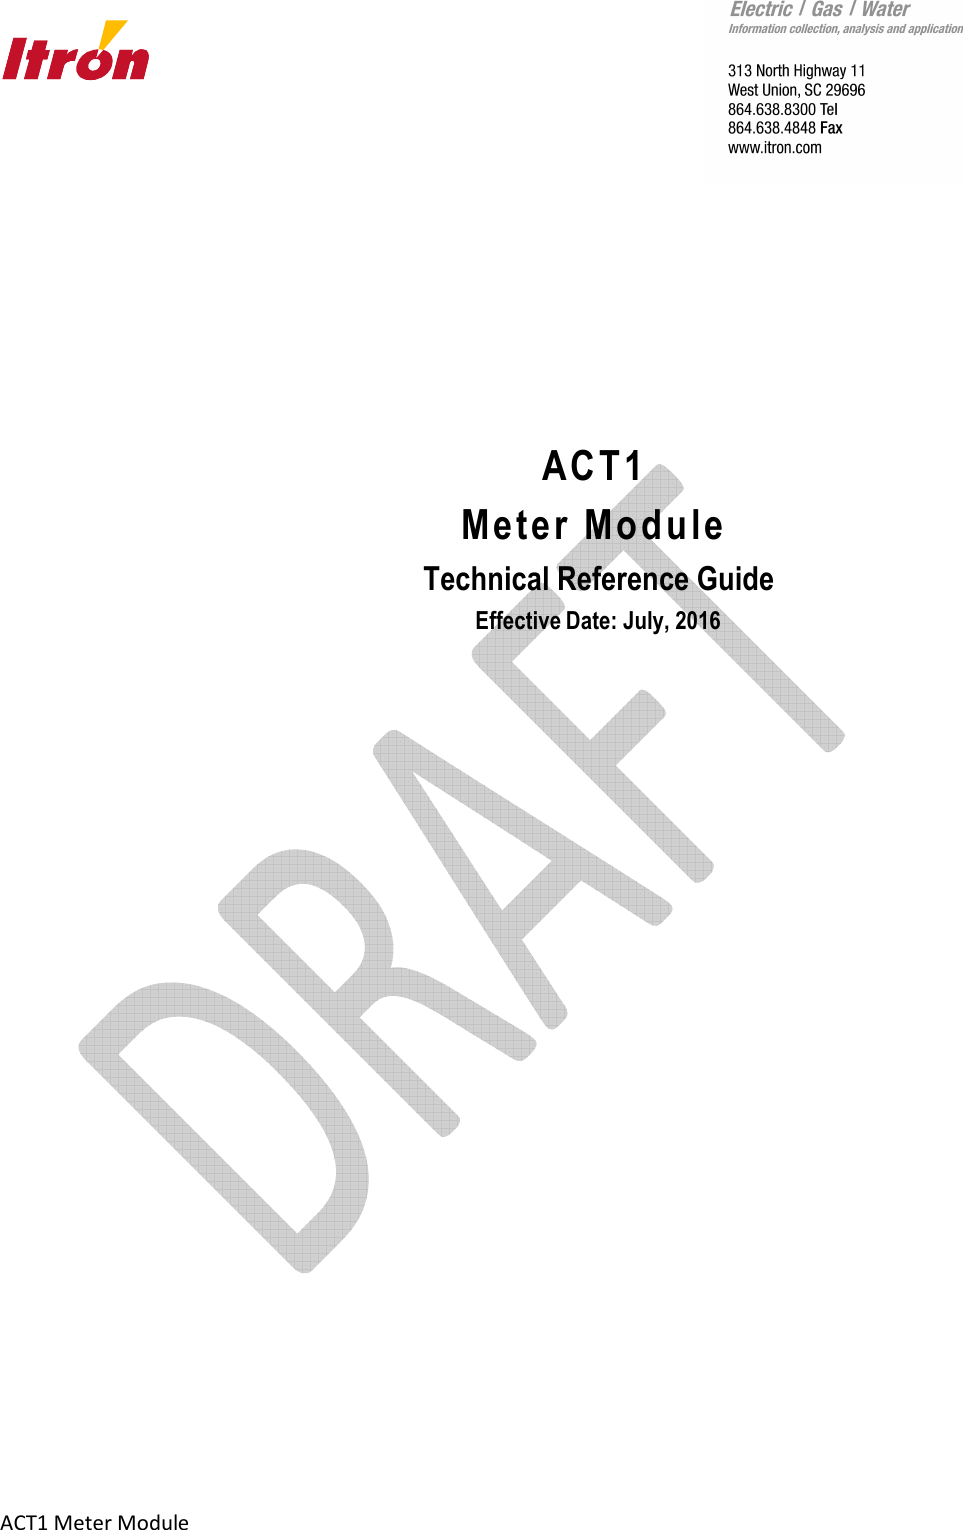       ACT1 Meter Module             ACT1 Meter Module  Technical Reference Guide  Effective Date: July, 2016     